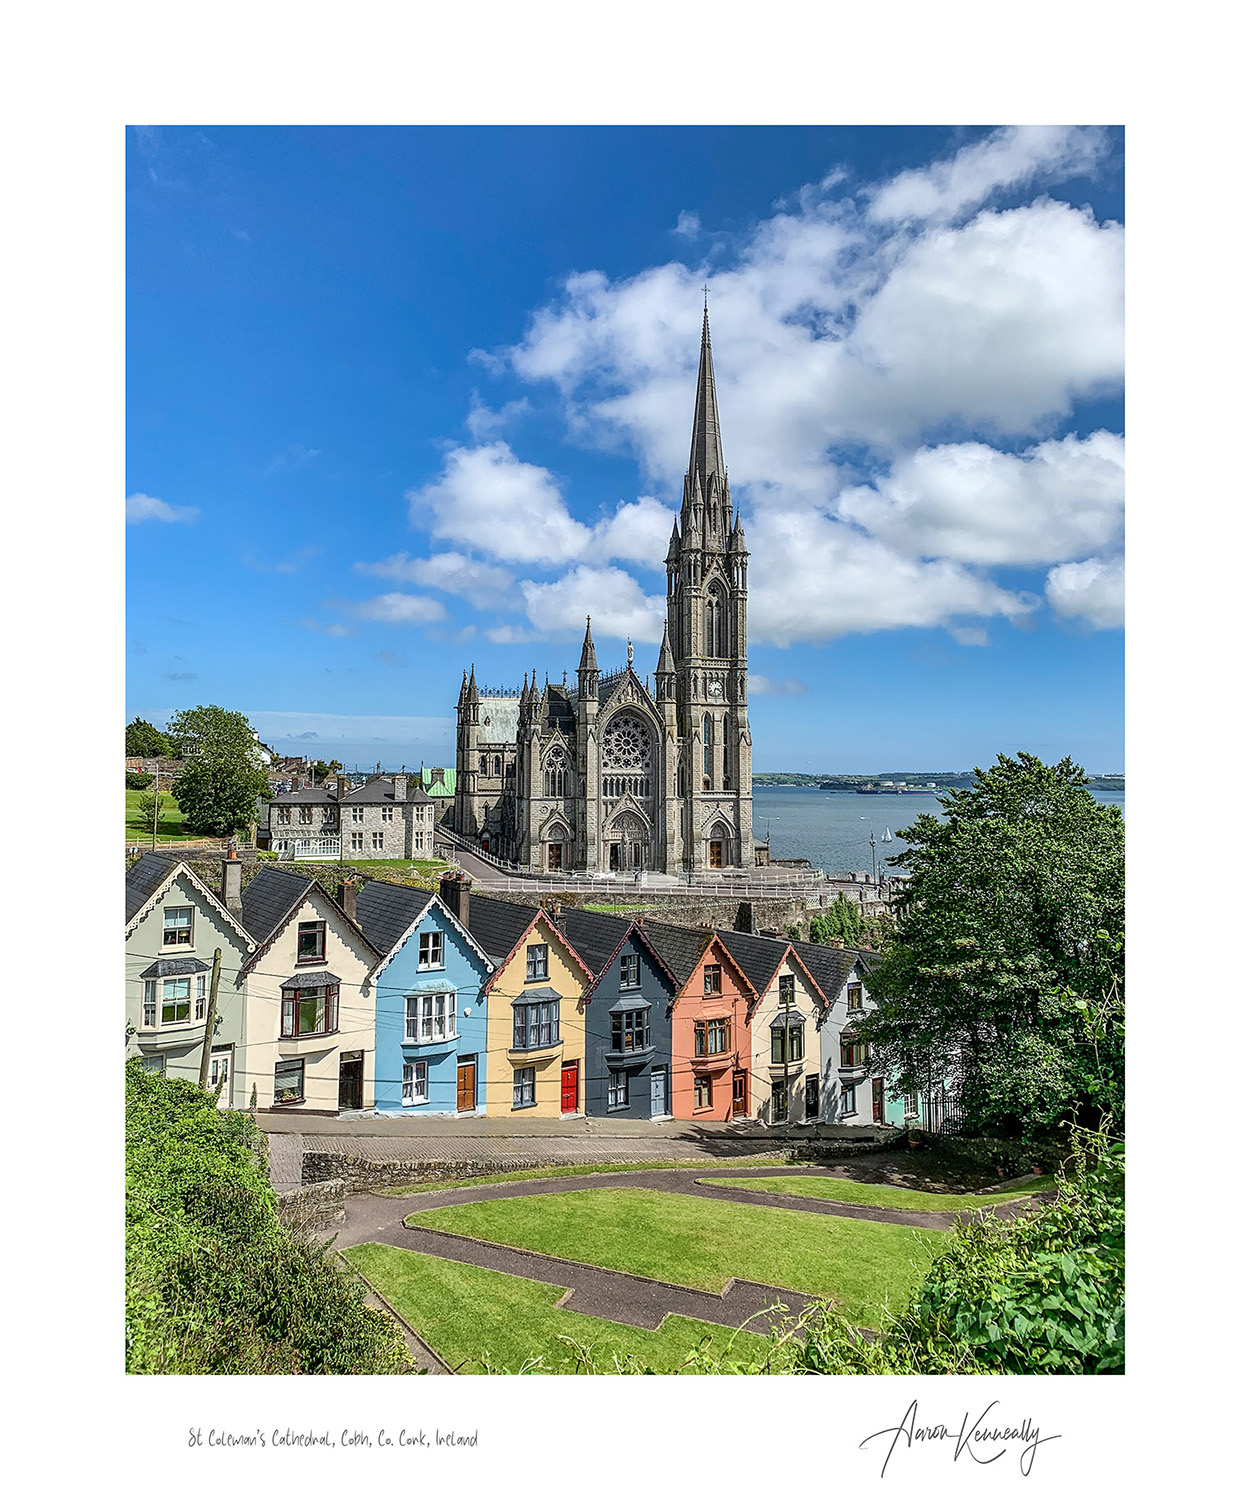 St Colman's Cathedral, Cobh, Co. Cork, Ireland